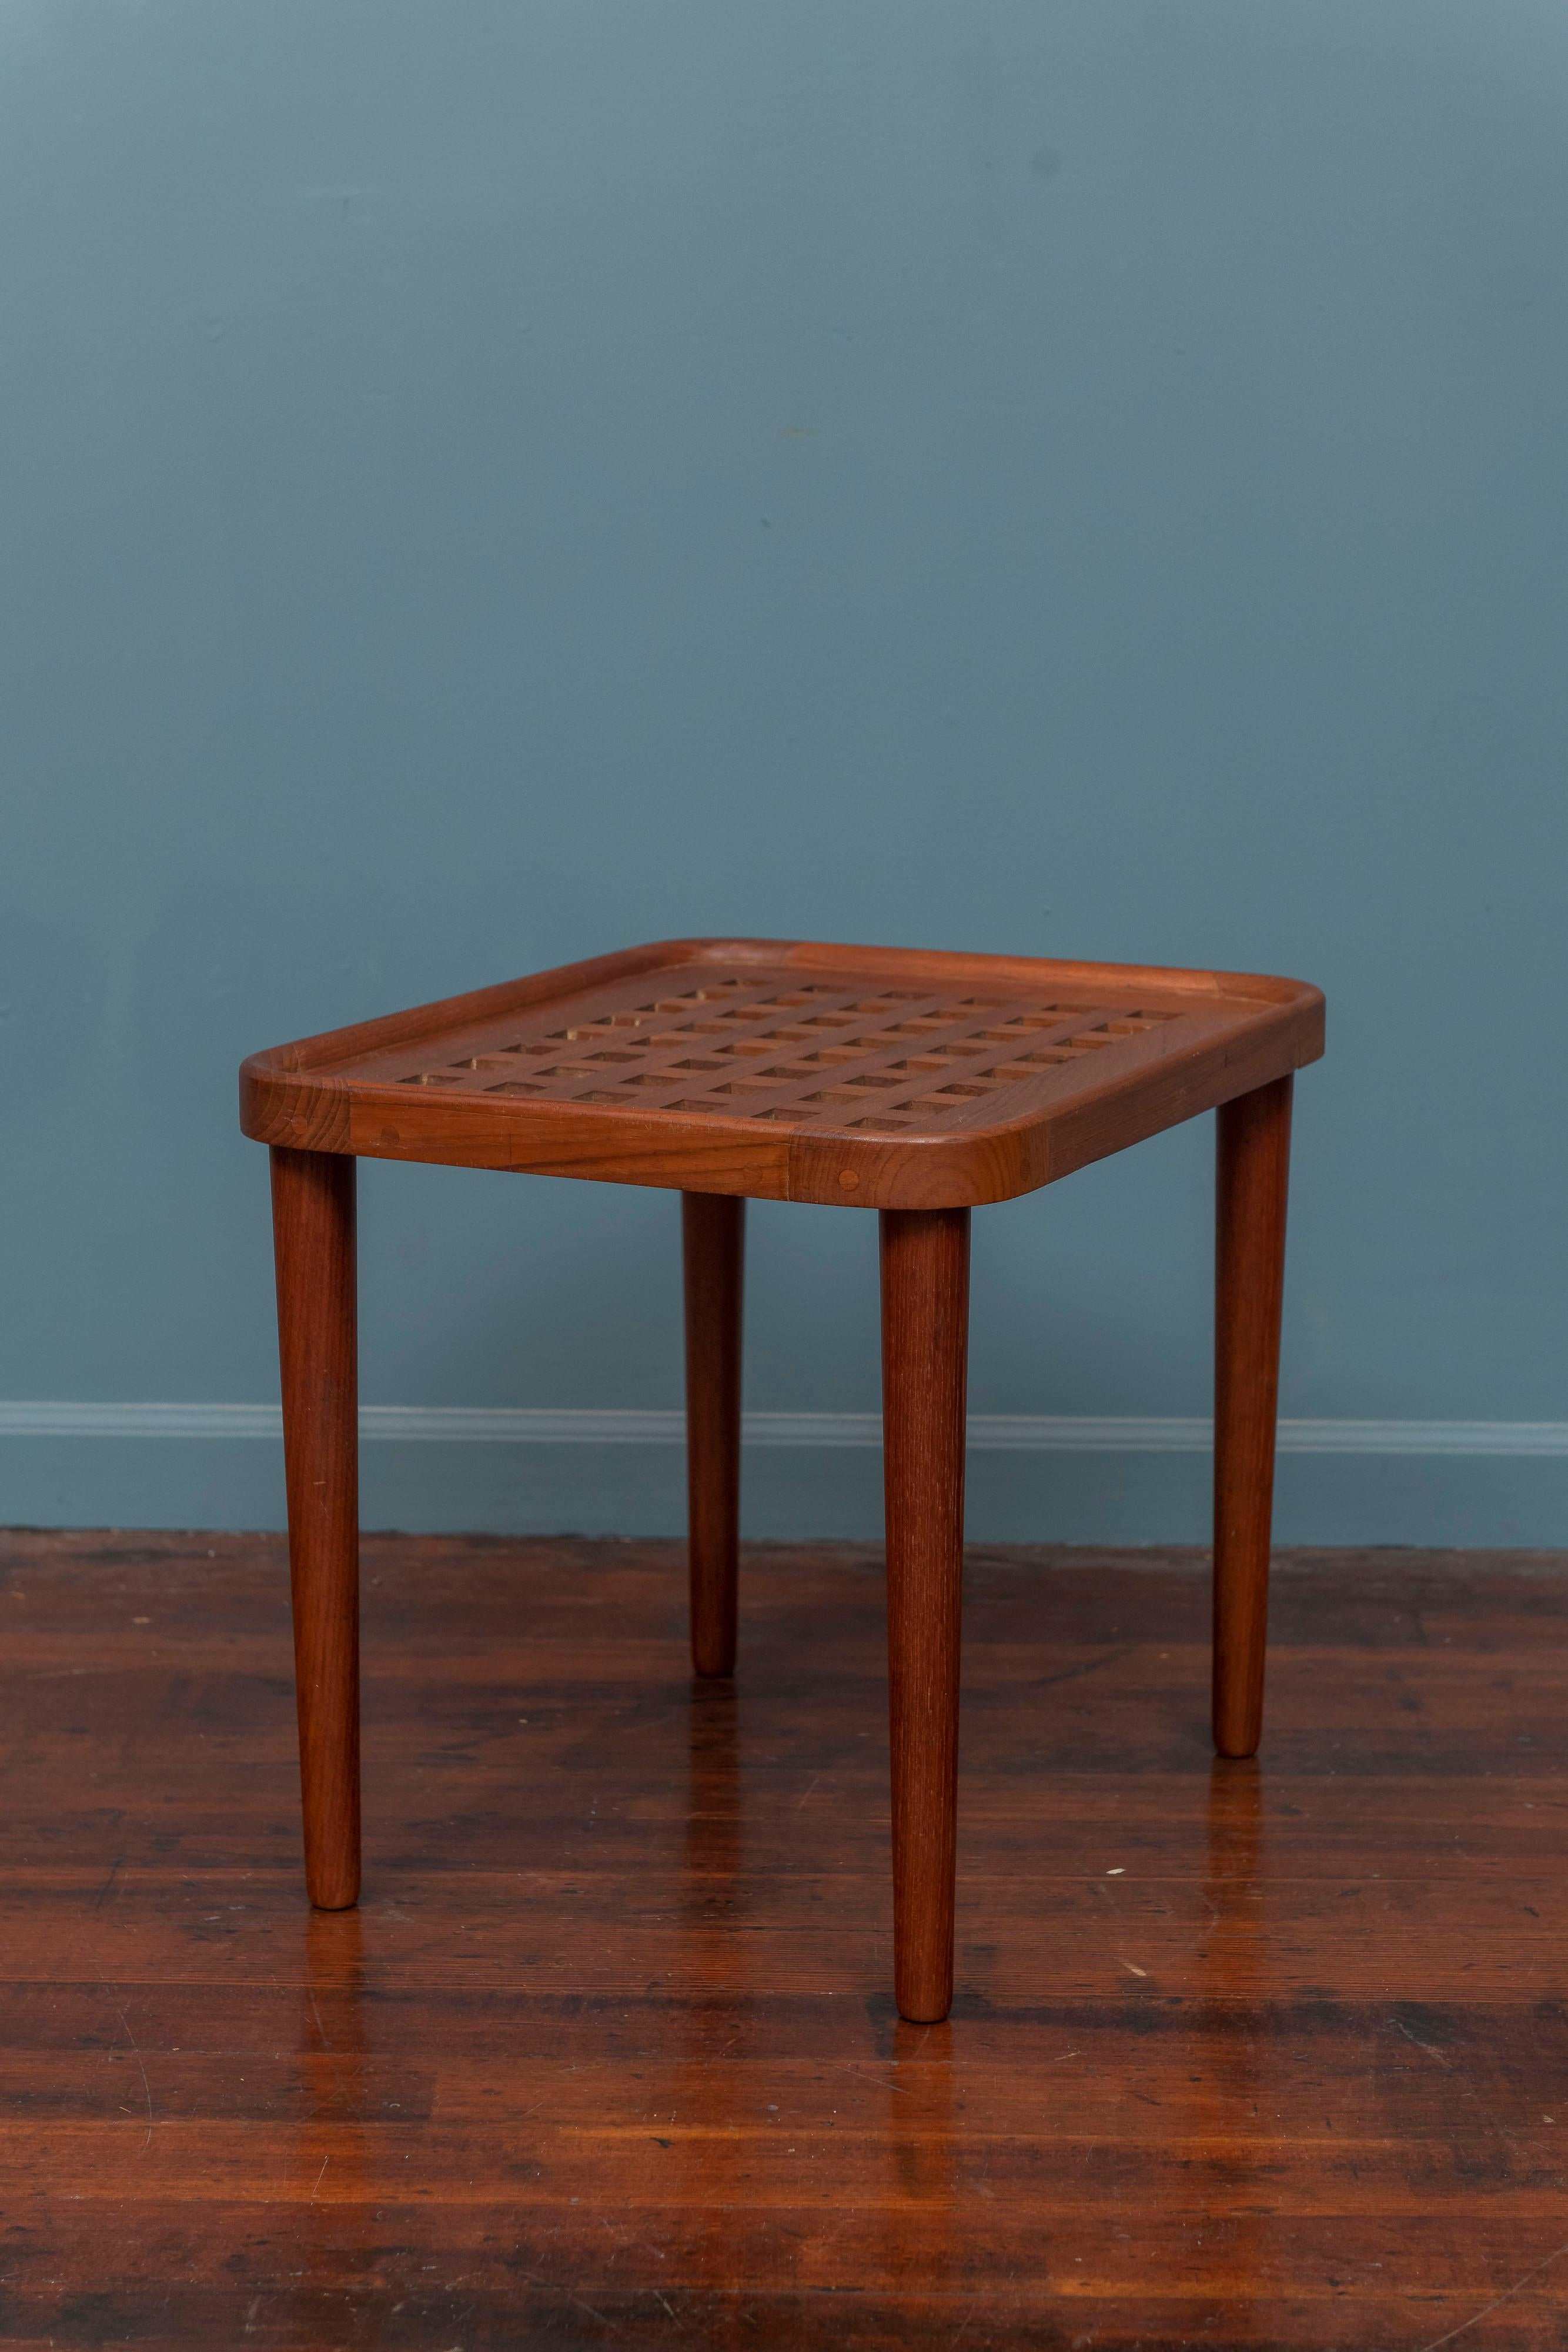 Scandanavian Modern solid teak side or end table. High quality construction and execution similar to a Jens Quistgaard serving tray with a pierced top and sculpted top edge and fixed legs. Perfect for an airy transparant interior, ready to install